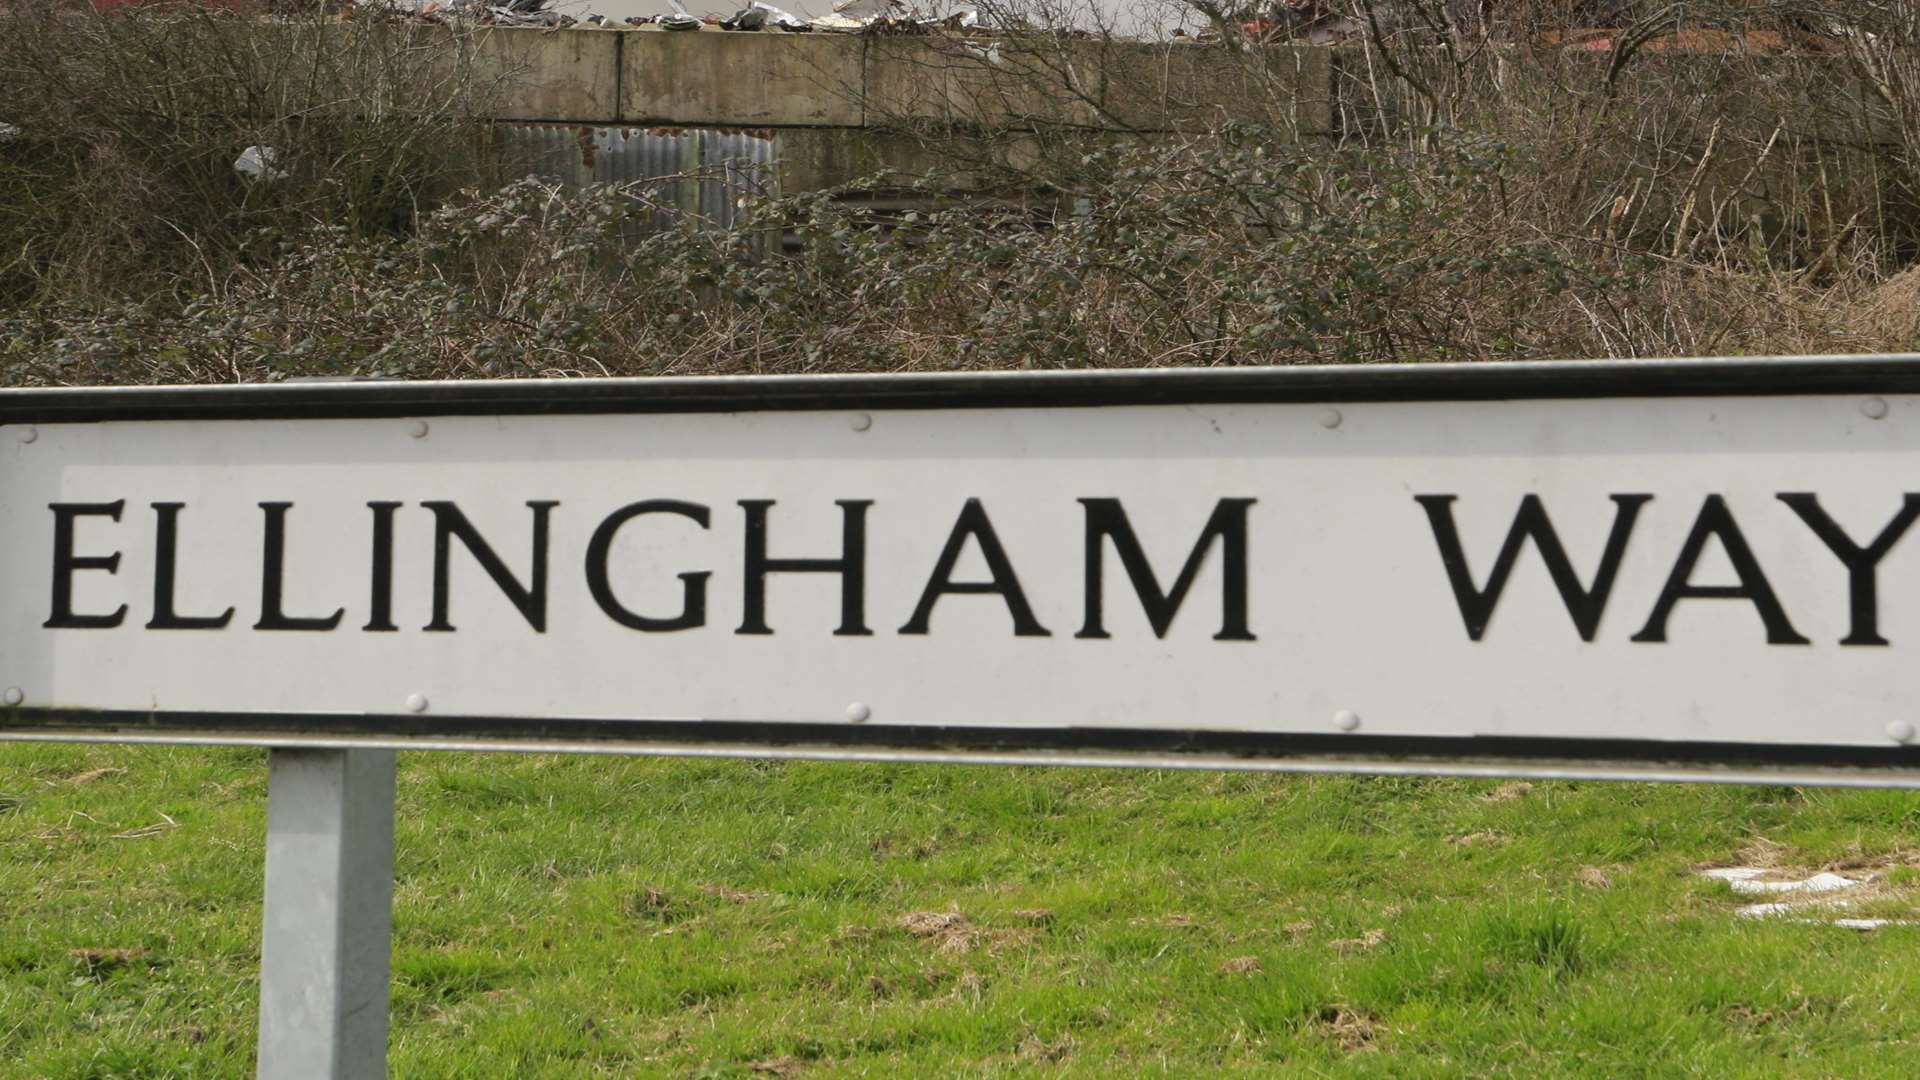 The accident happened at a site in Ellingham Way